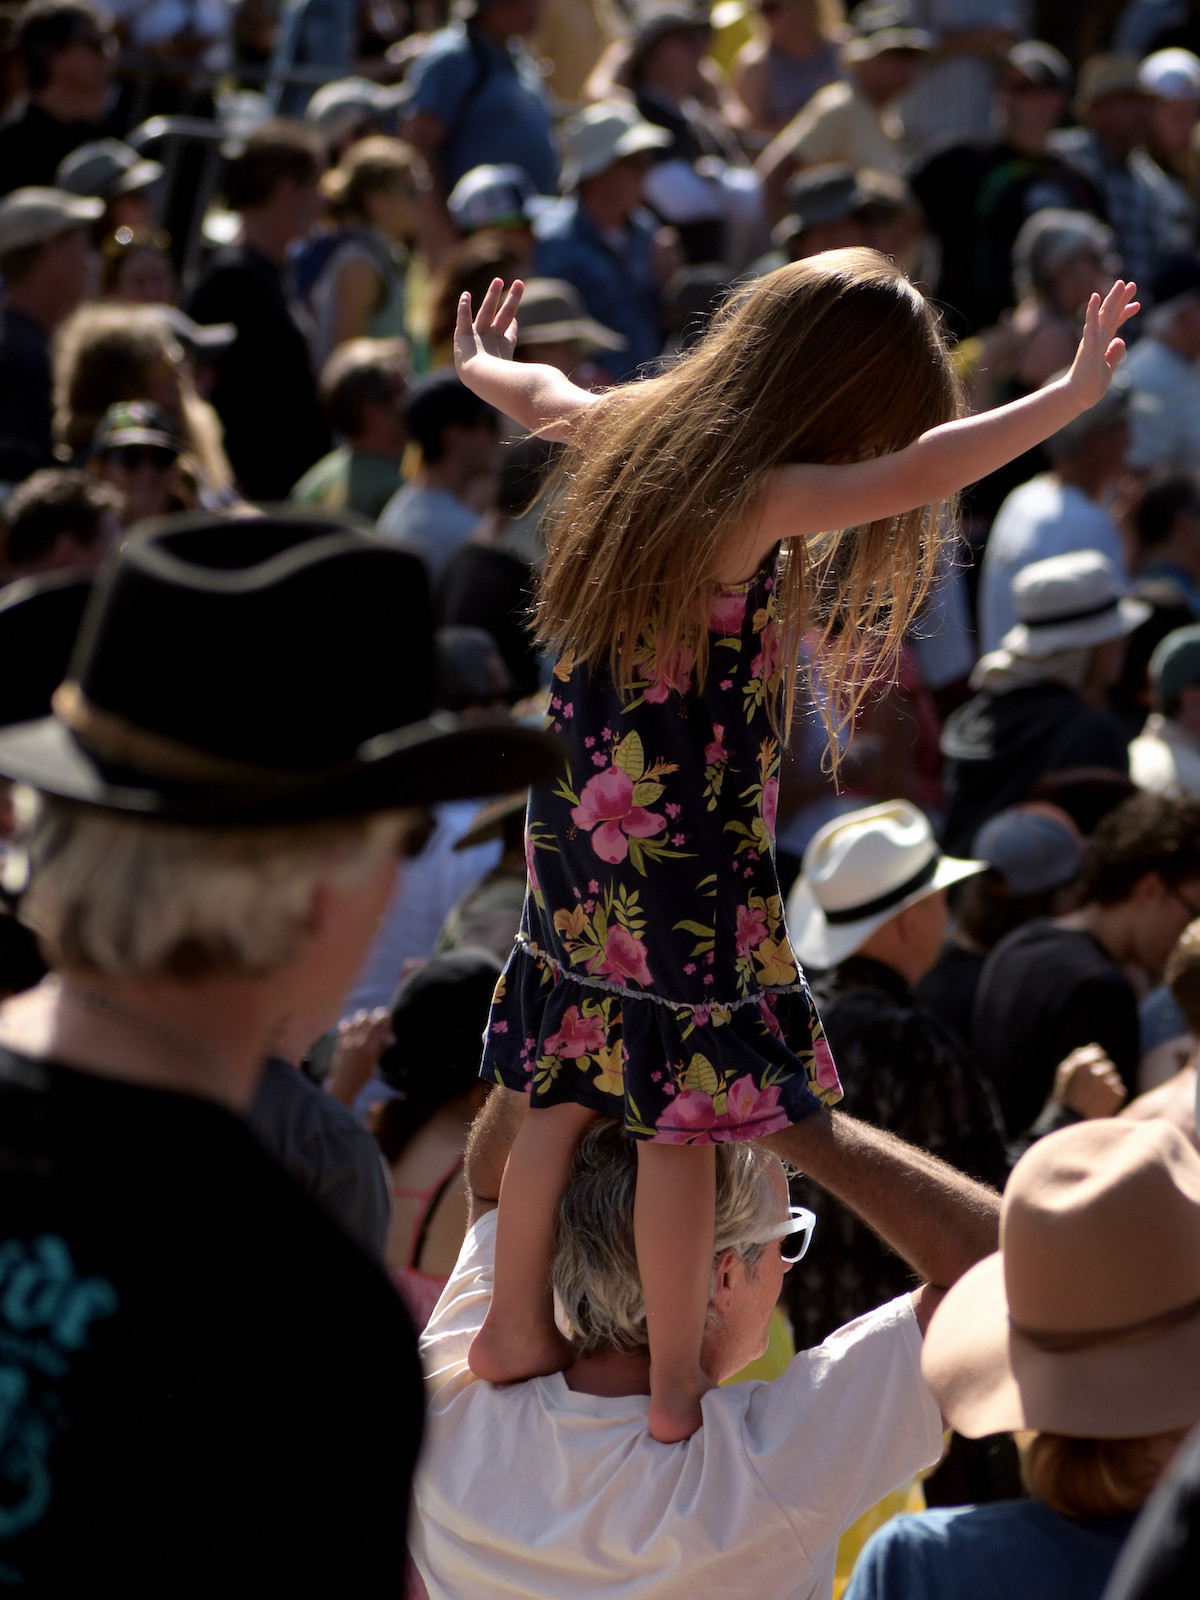 A little girl wearing a black dress with pink flowers stands on a man's shoulders in a large crowd at a music festival in summer in San Francisco